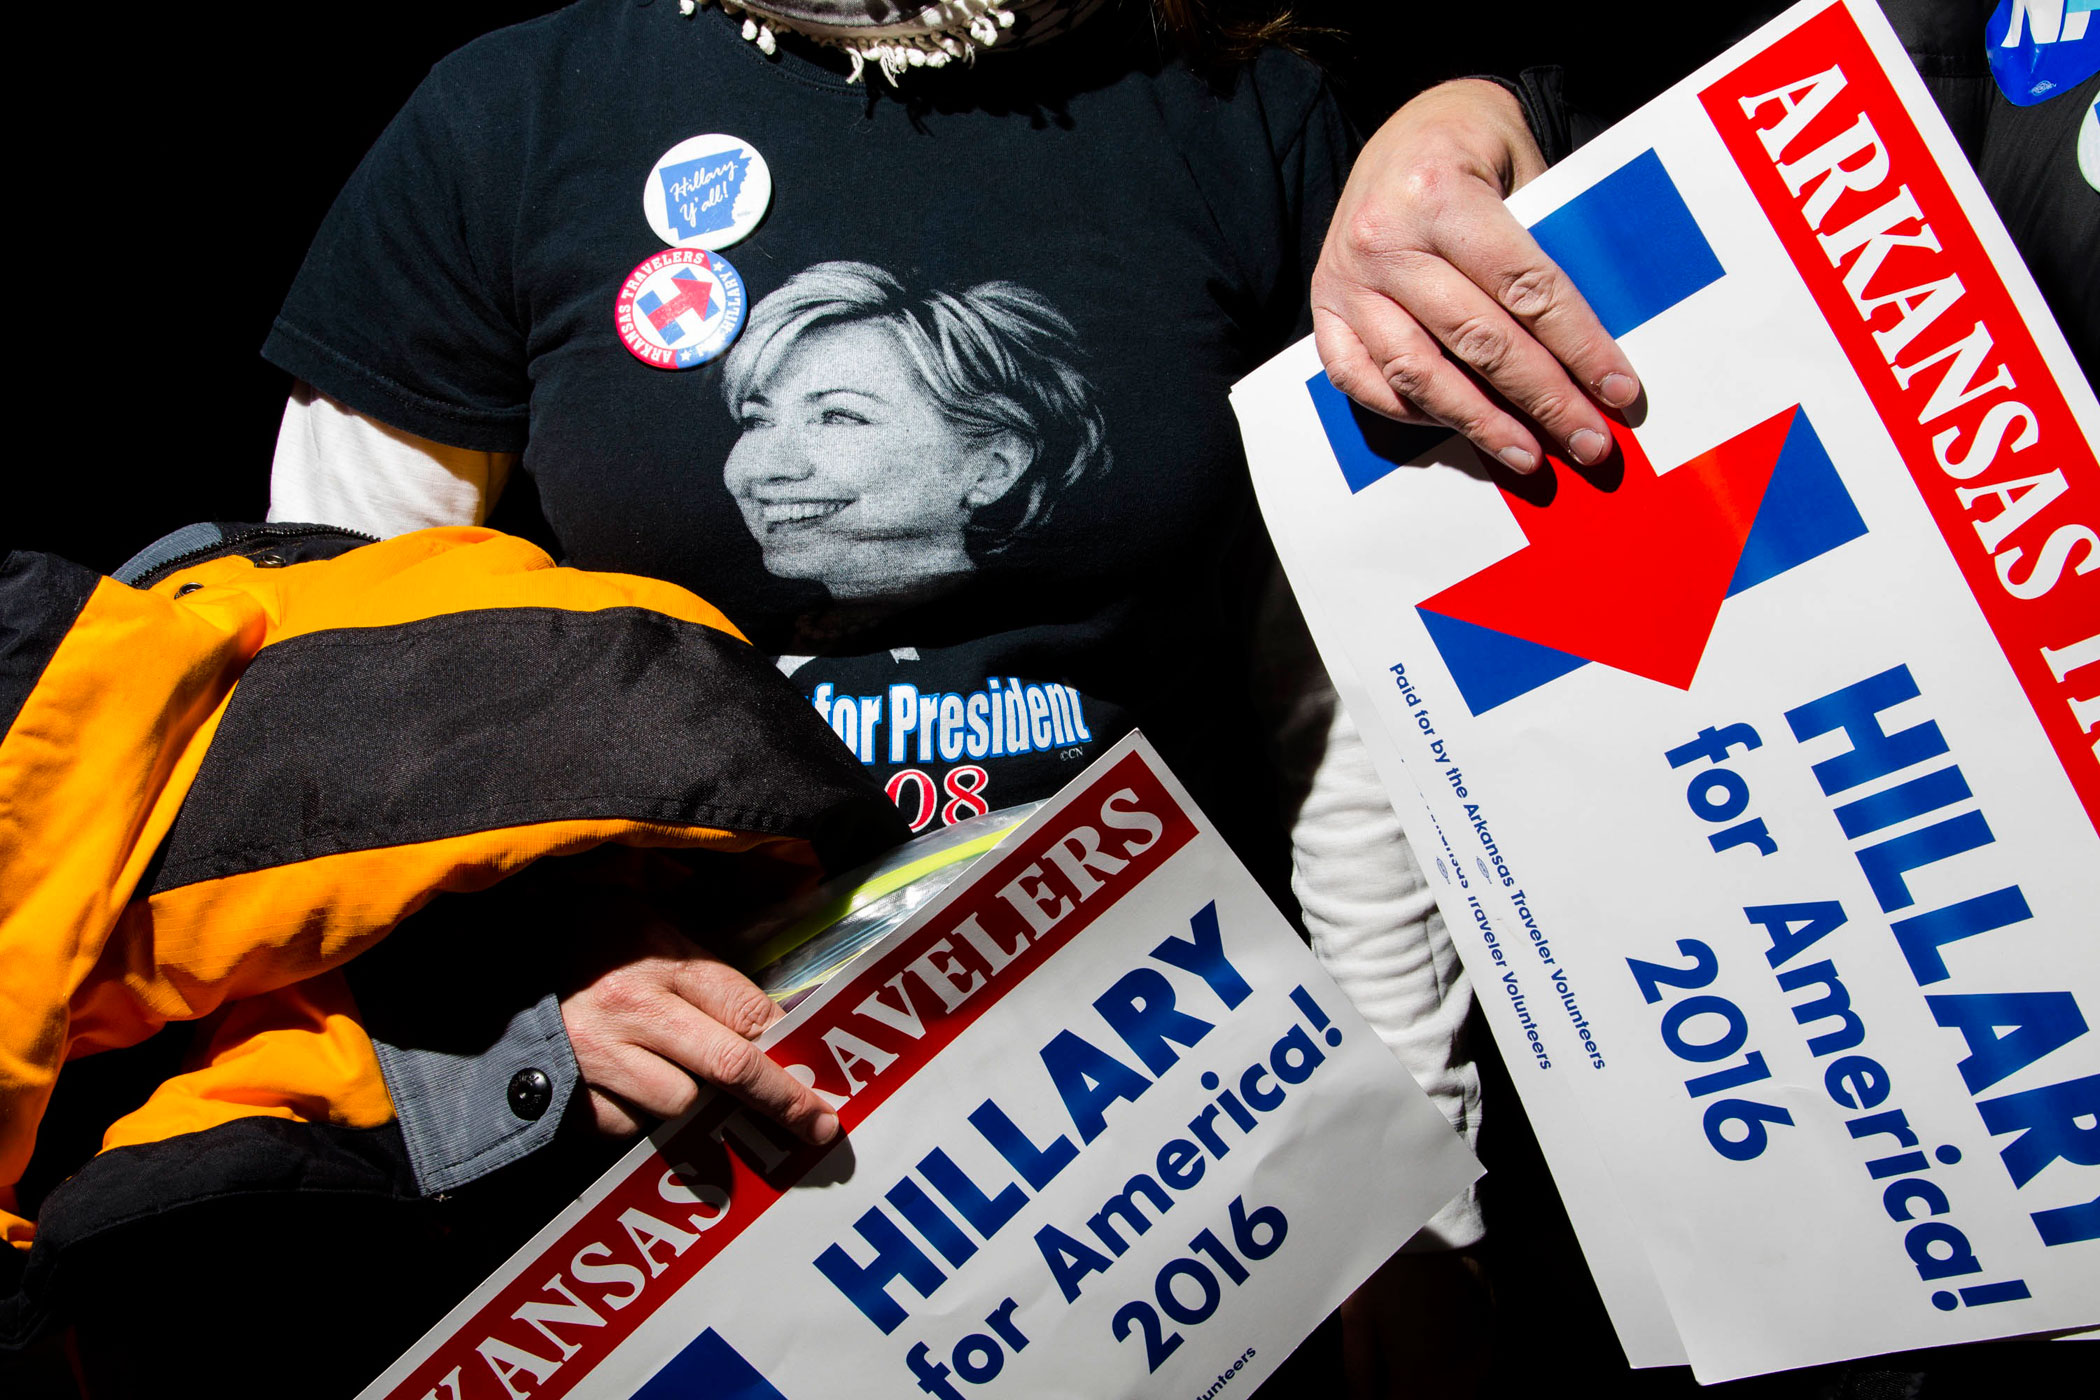 Supporters of Democratic presidential candidate Hillary Clinton attend a campaign event at Great Bay Community College on Feb. 6, 2016, in Portsmouth, N.H.